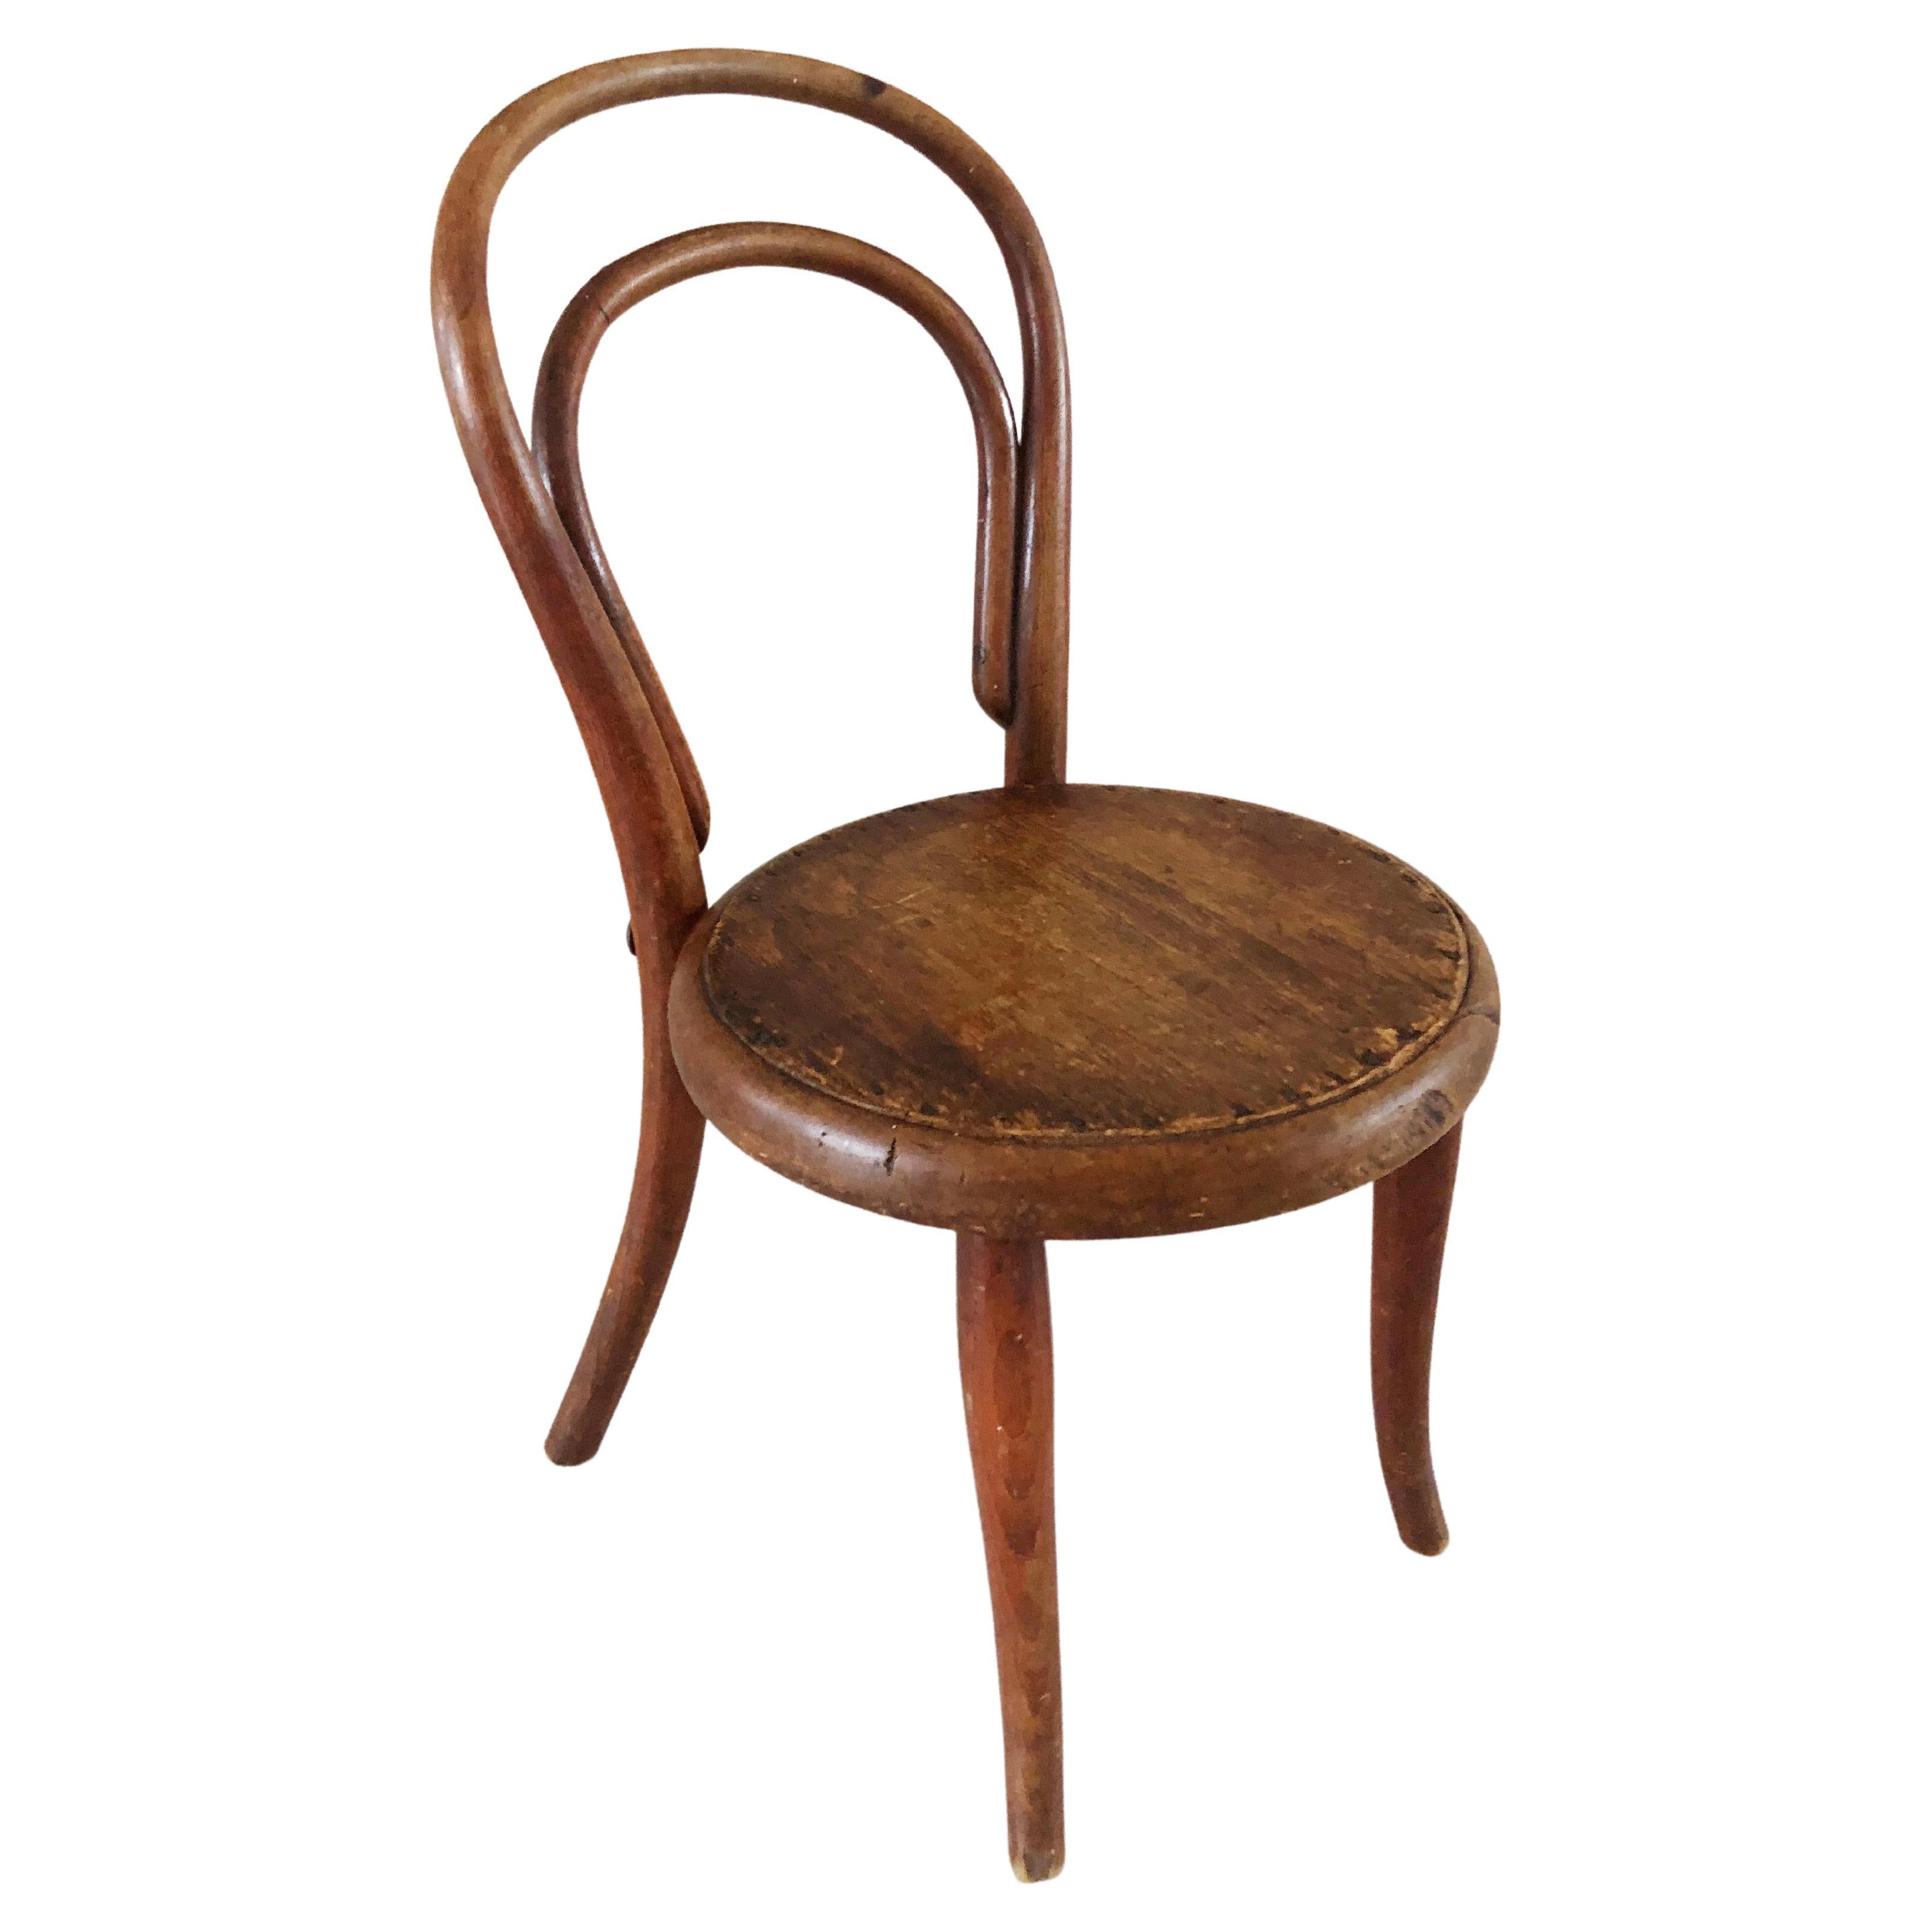 Thonet Child Chair No14 / designed 1859 Vienna / Stamped and labeled / Bentwood